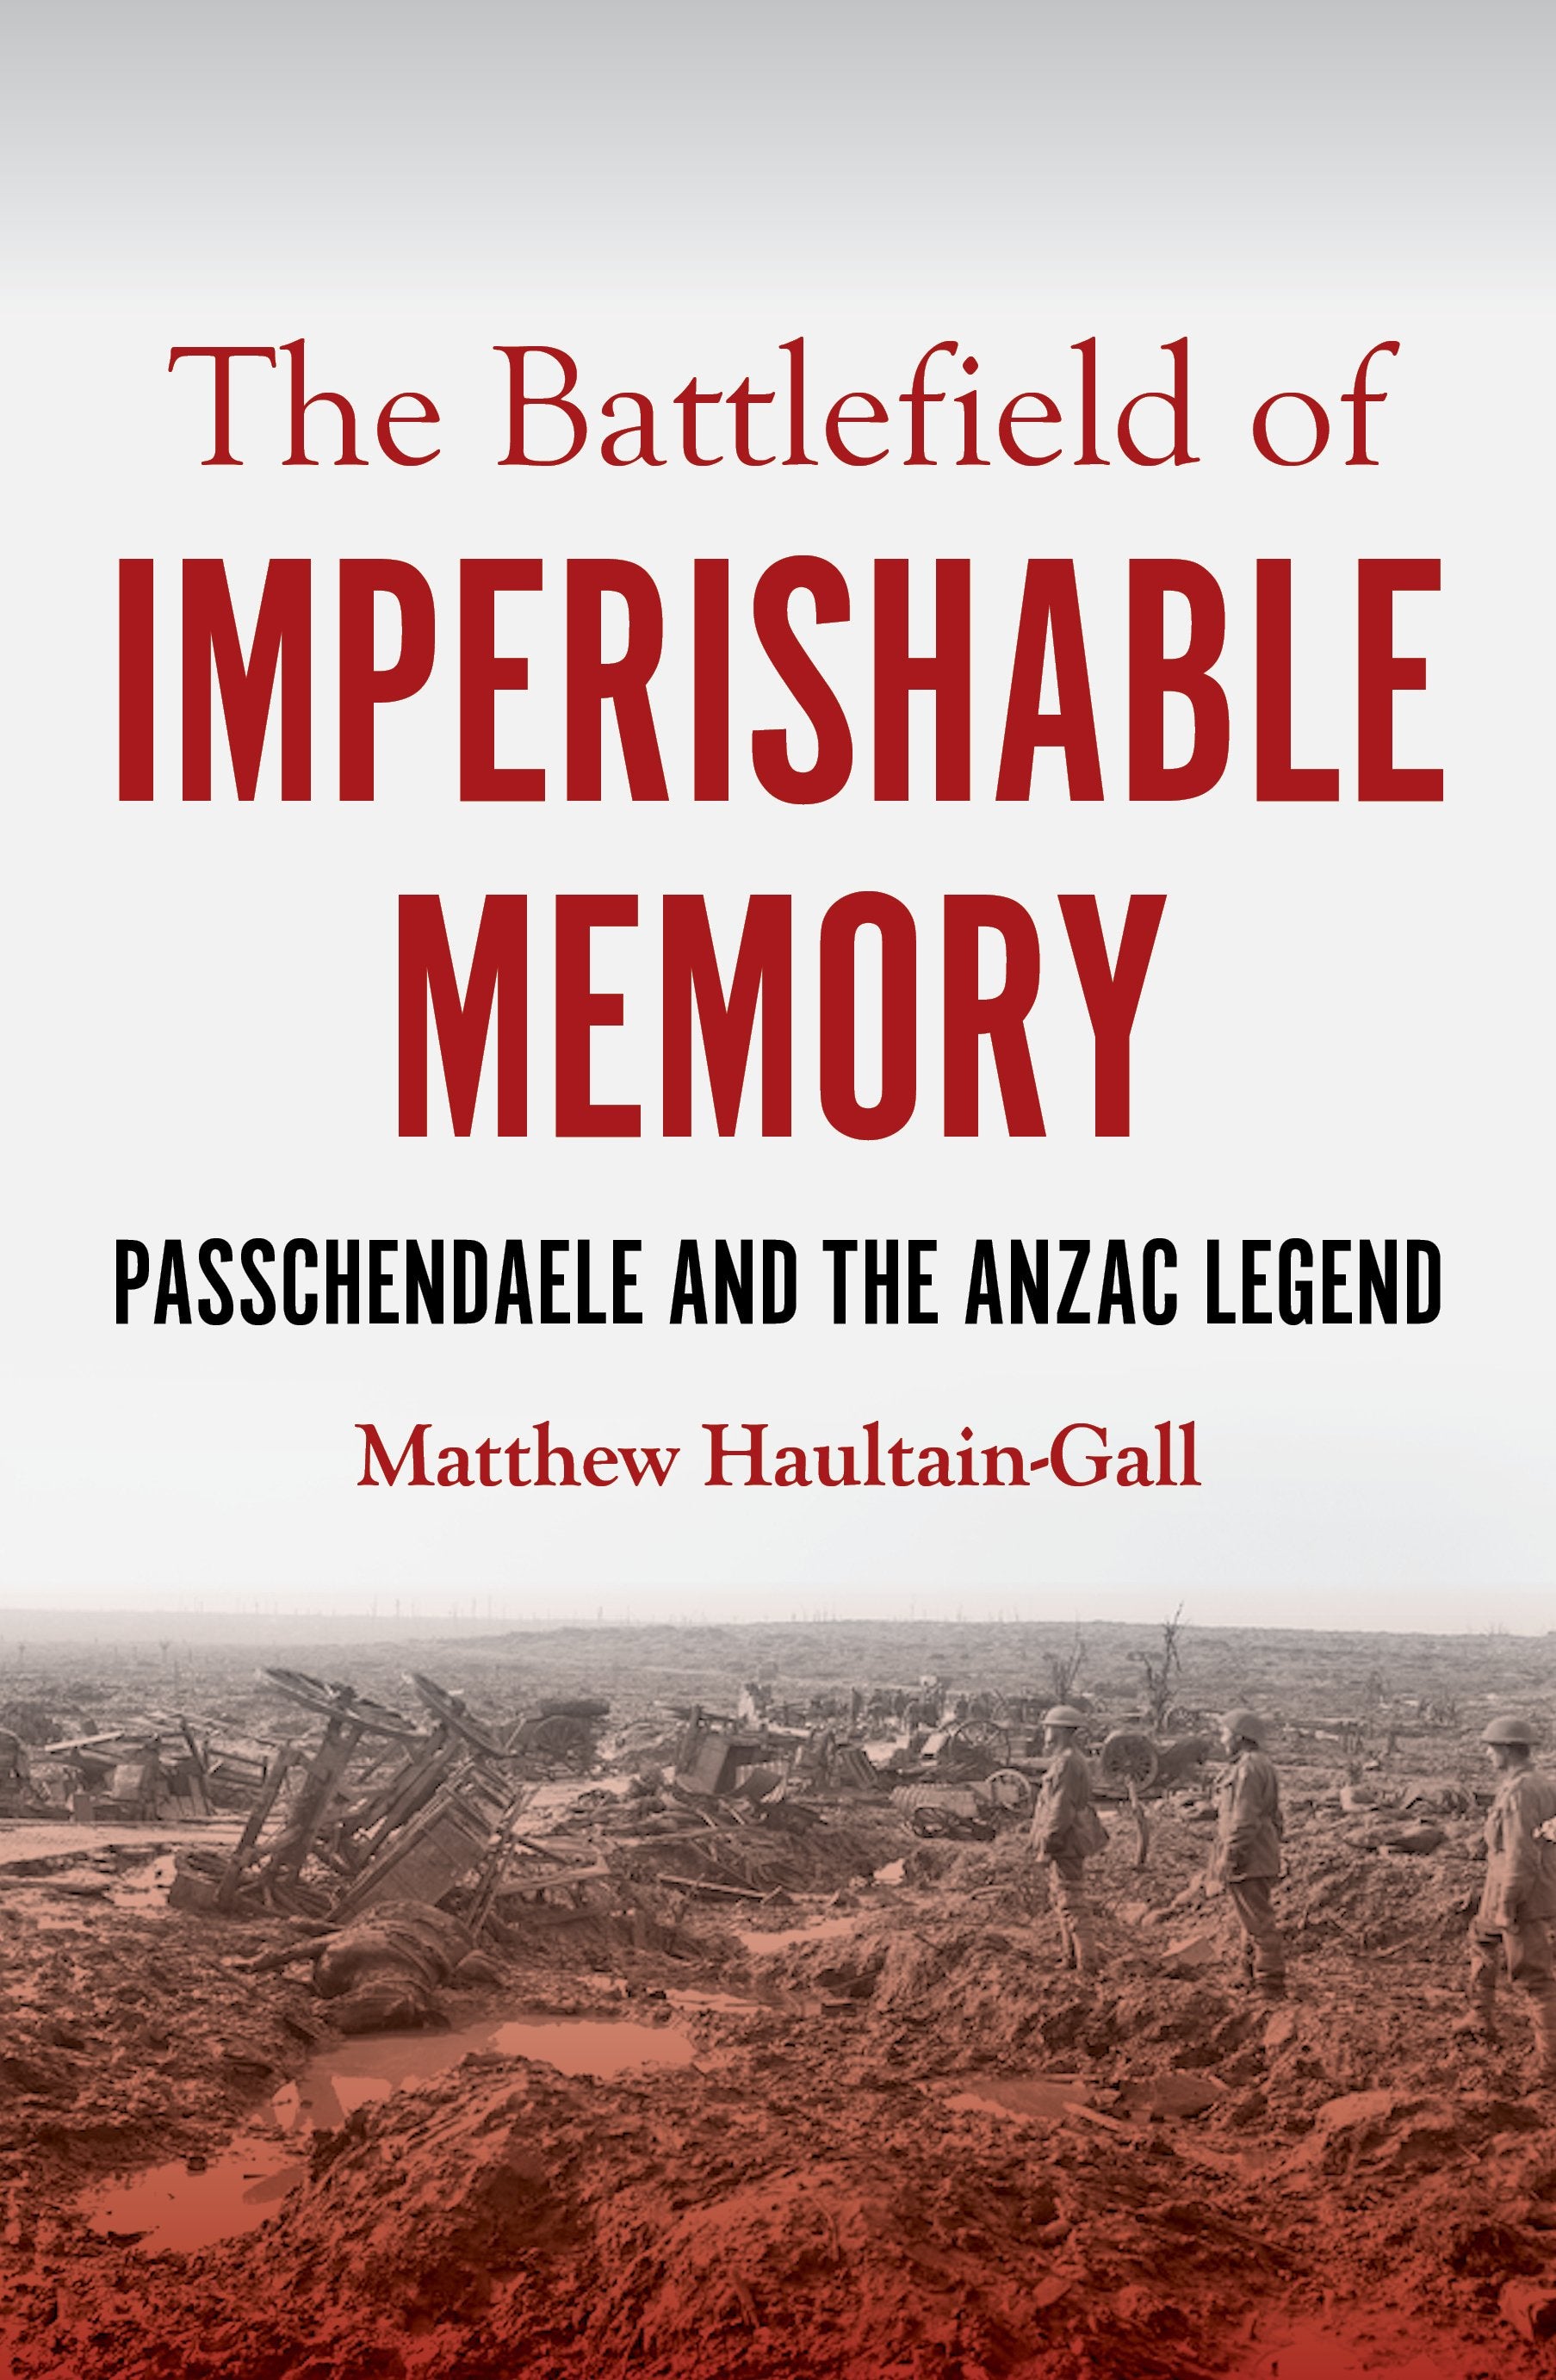 The battlefield of imperishable memory: Passchendaele and the Anzac legend